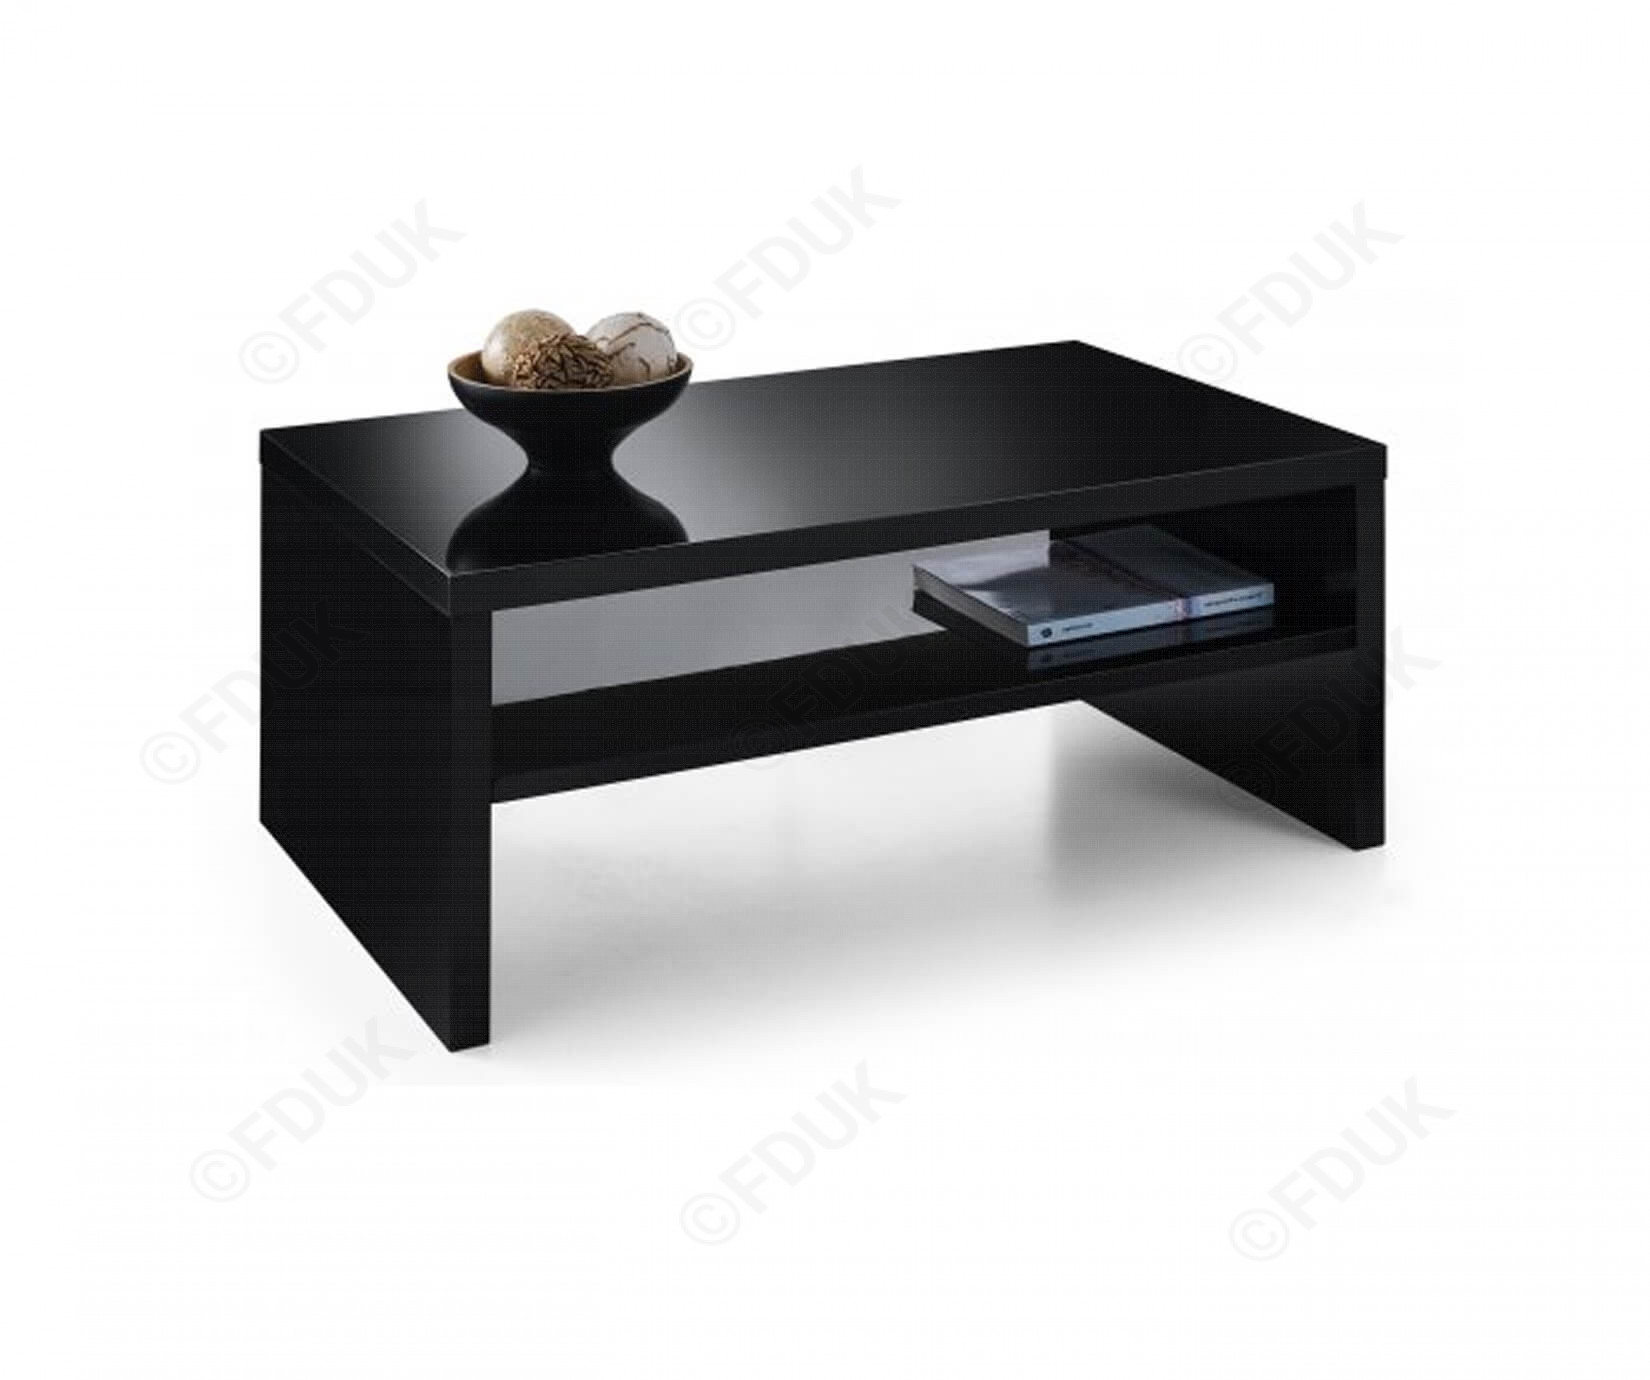 julian bowen metro black high gloss coffee table end glass top cocktail laura ashley home decorating ideas stackable wicker furniture stacking tables sense dresser lift kmart